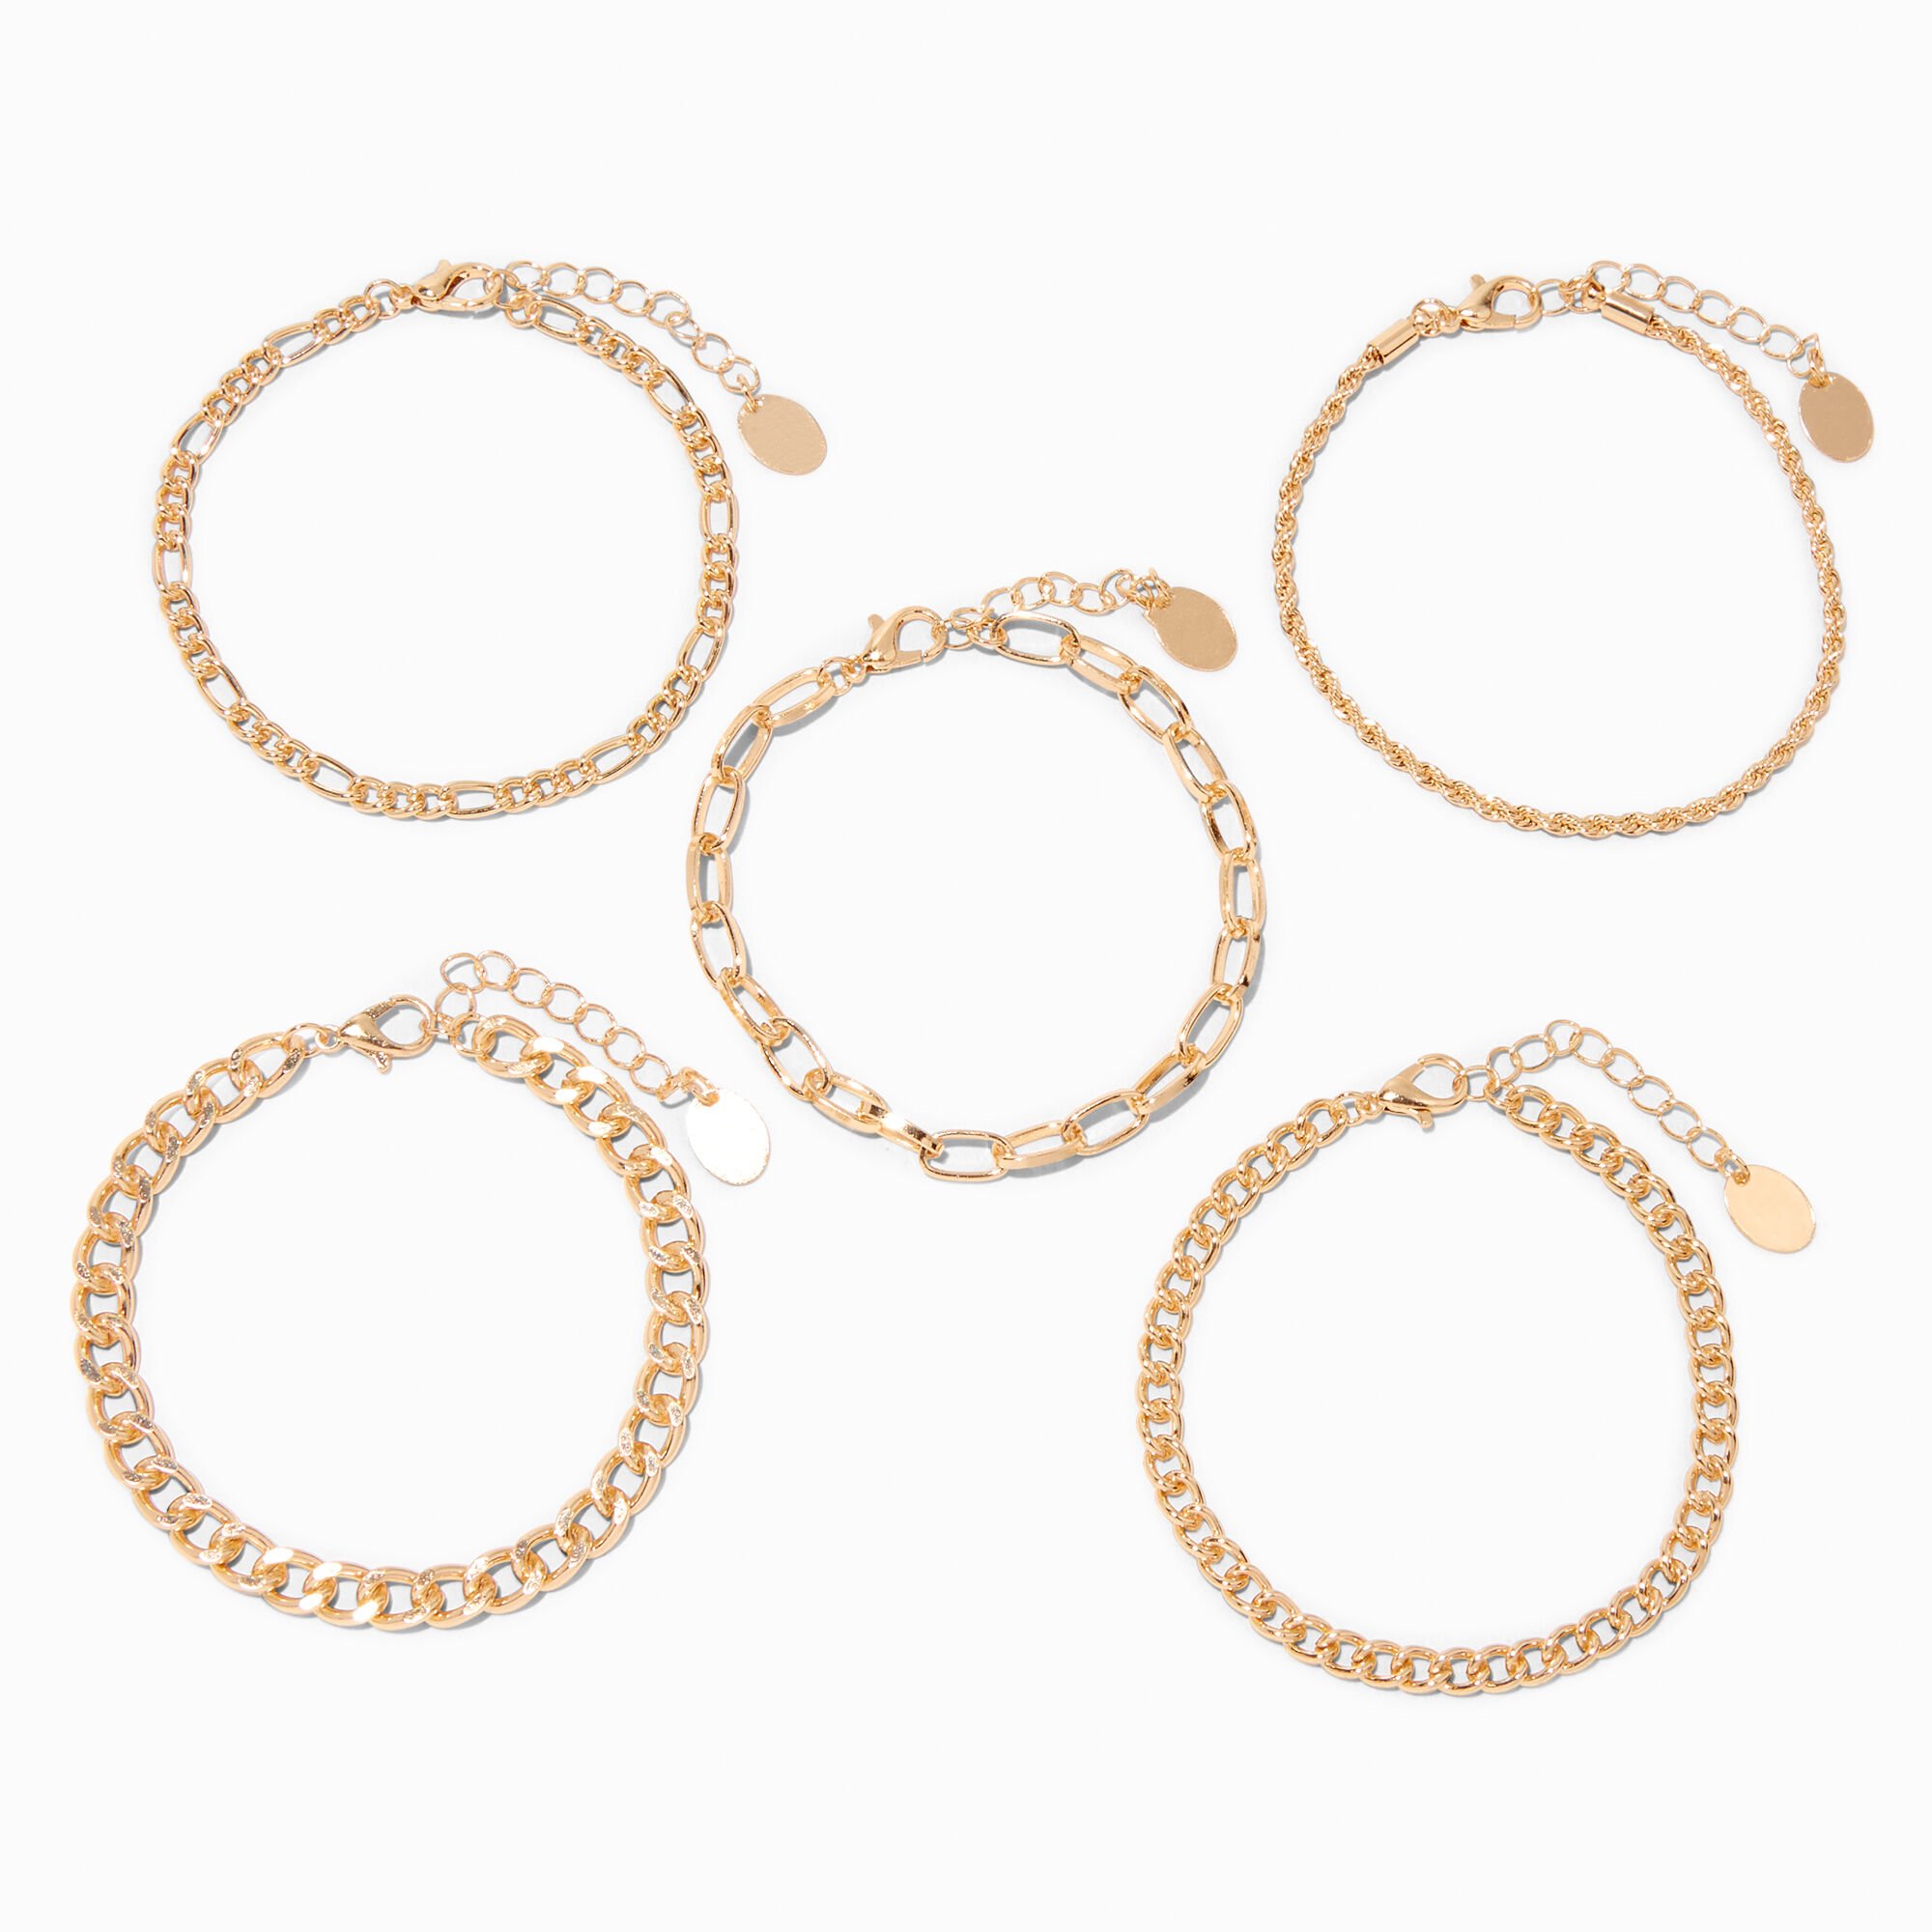 View Claires Woven Chain Bracelet Set 5 Pack Gold information